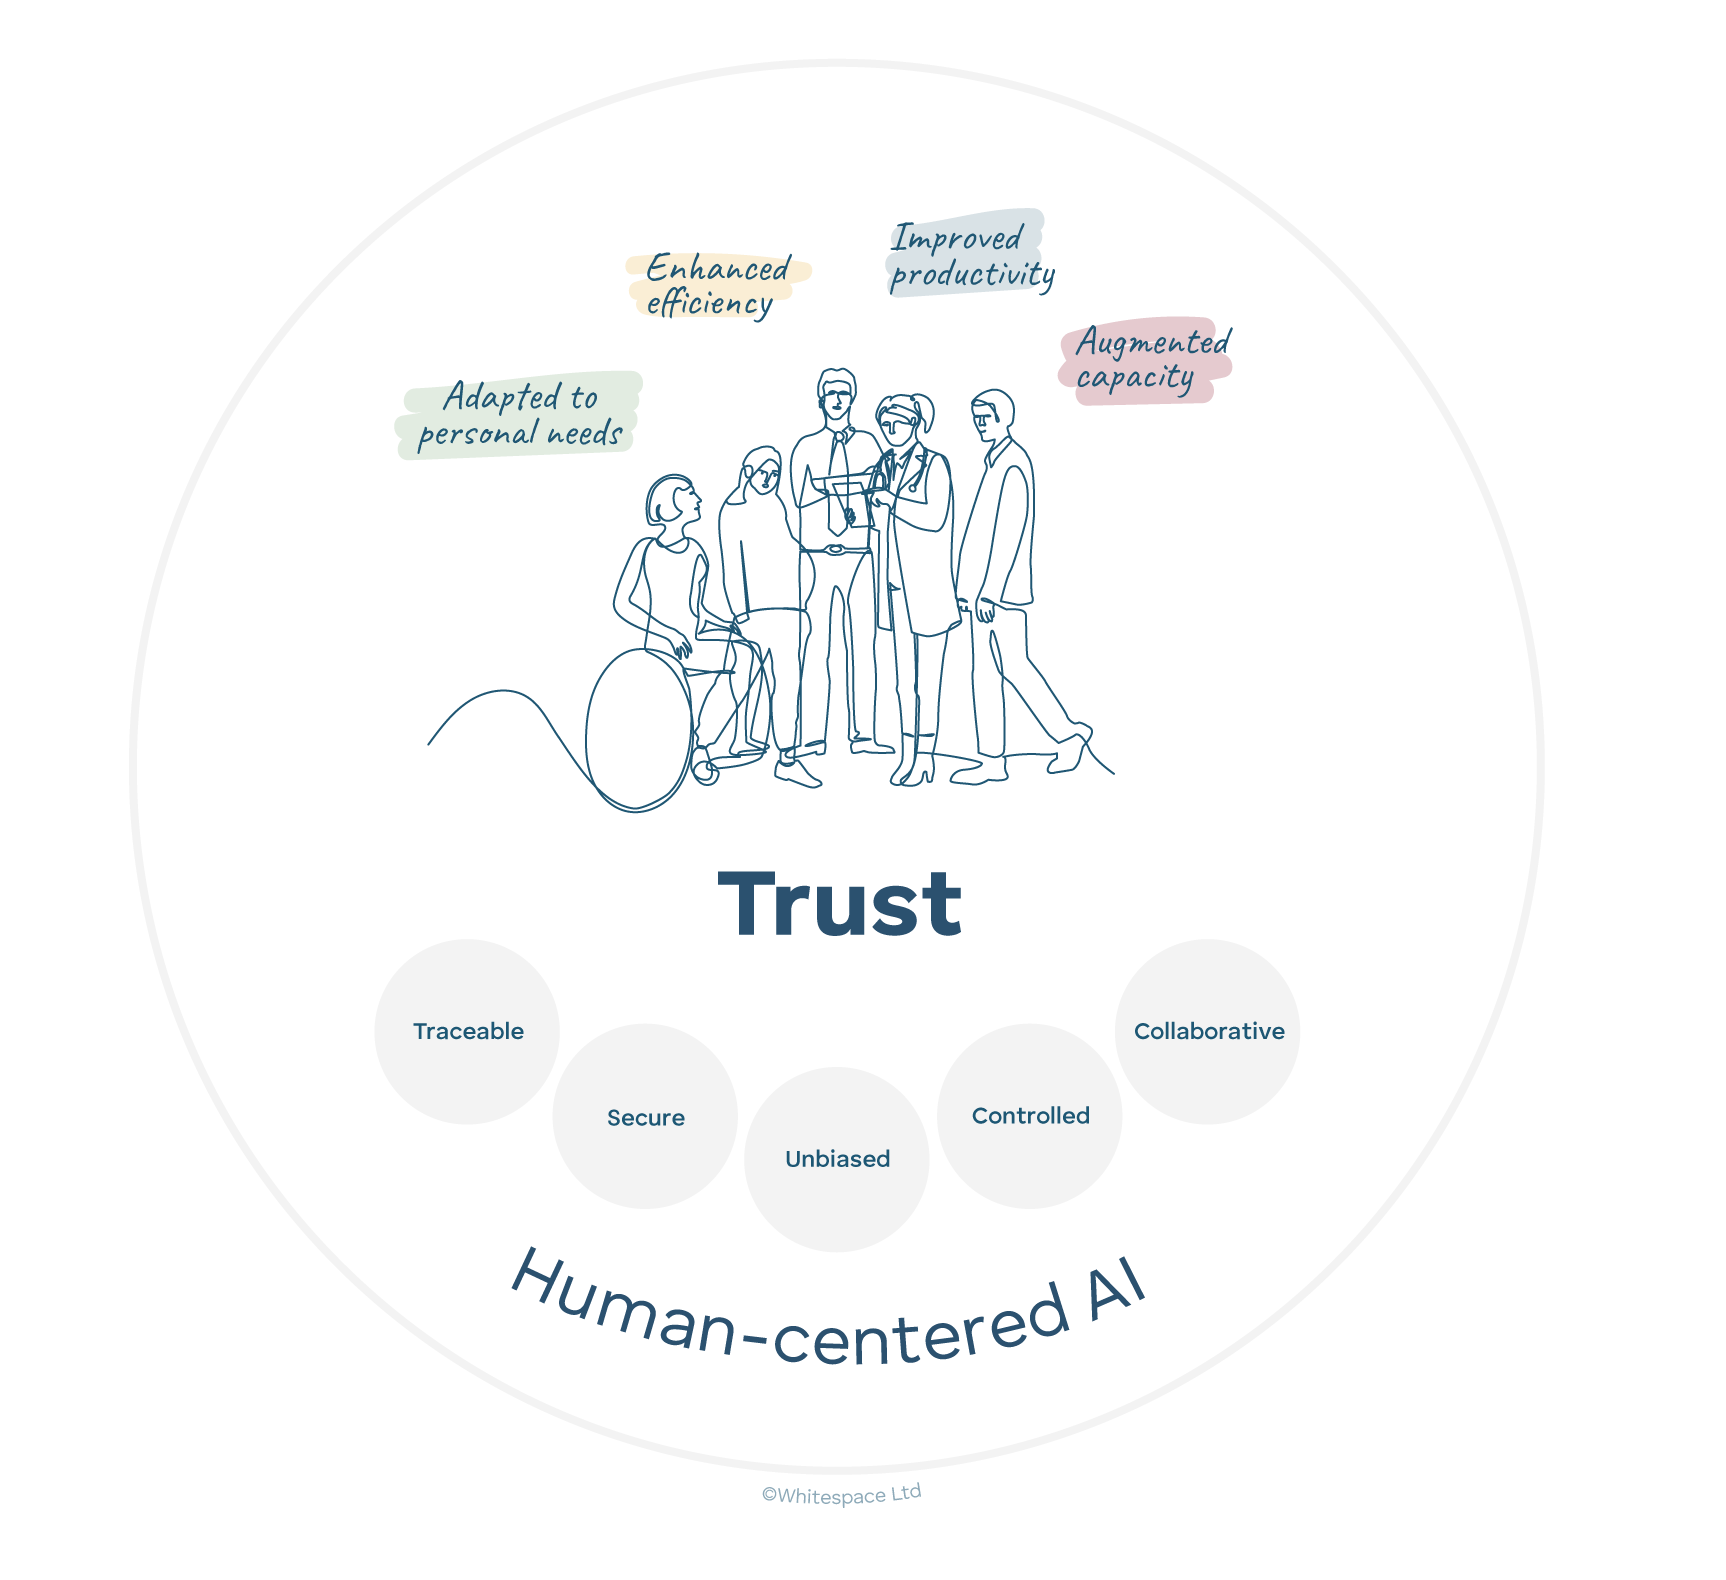 People feel empowered by AI when they trust it.